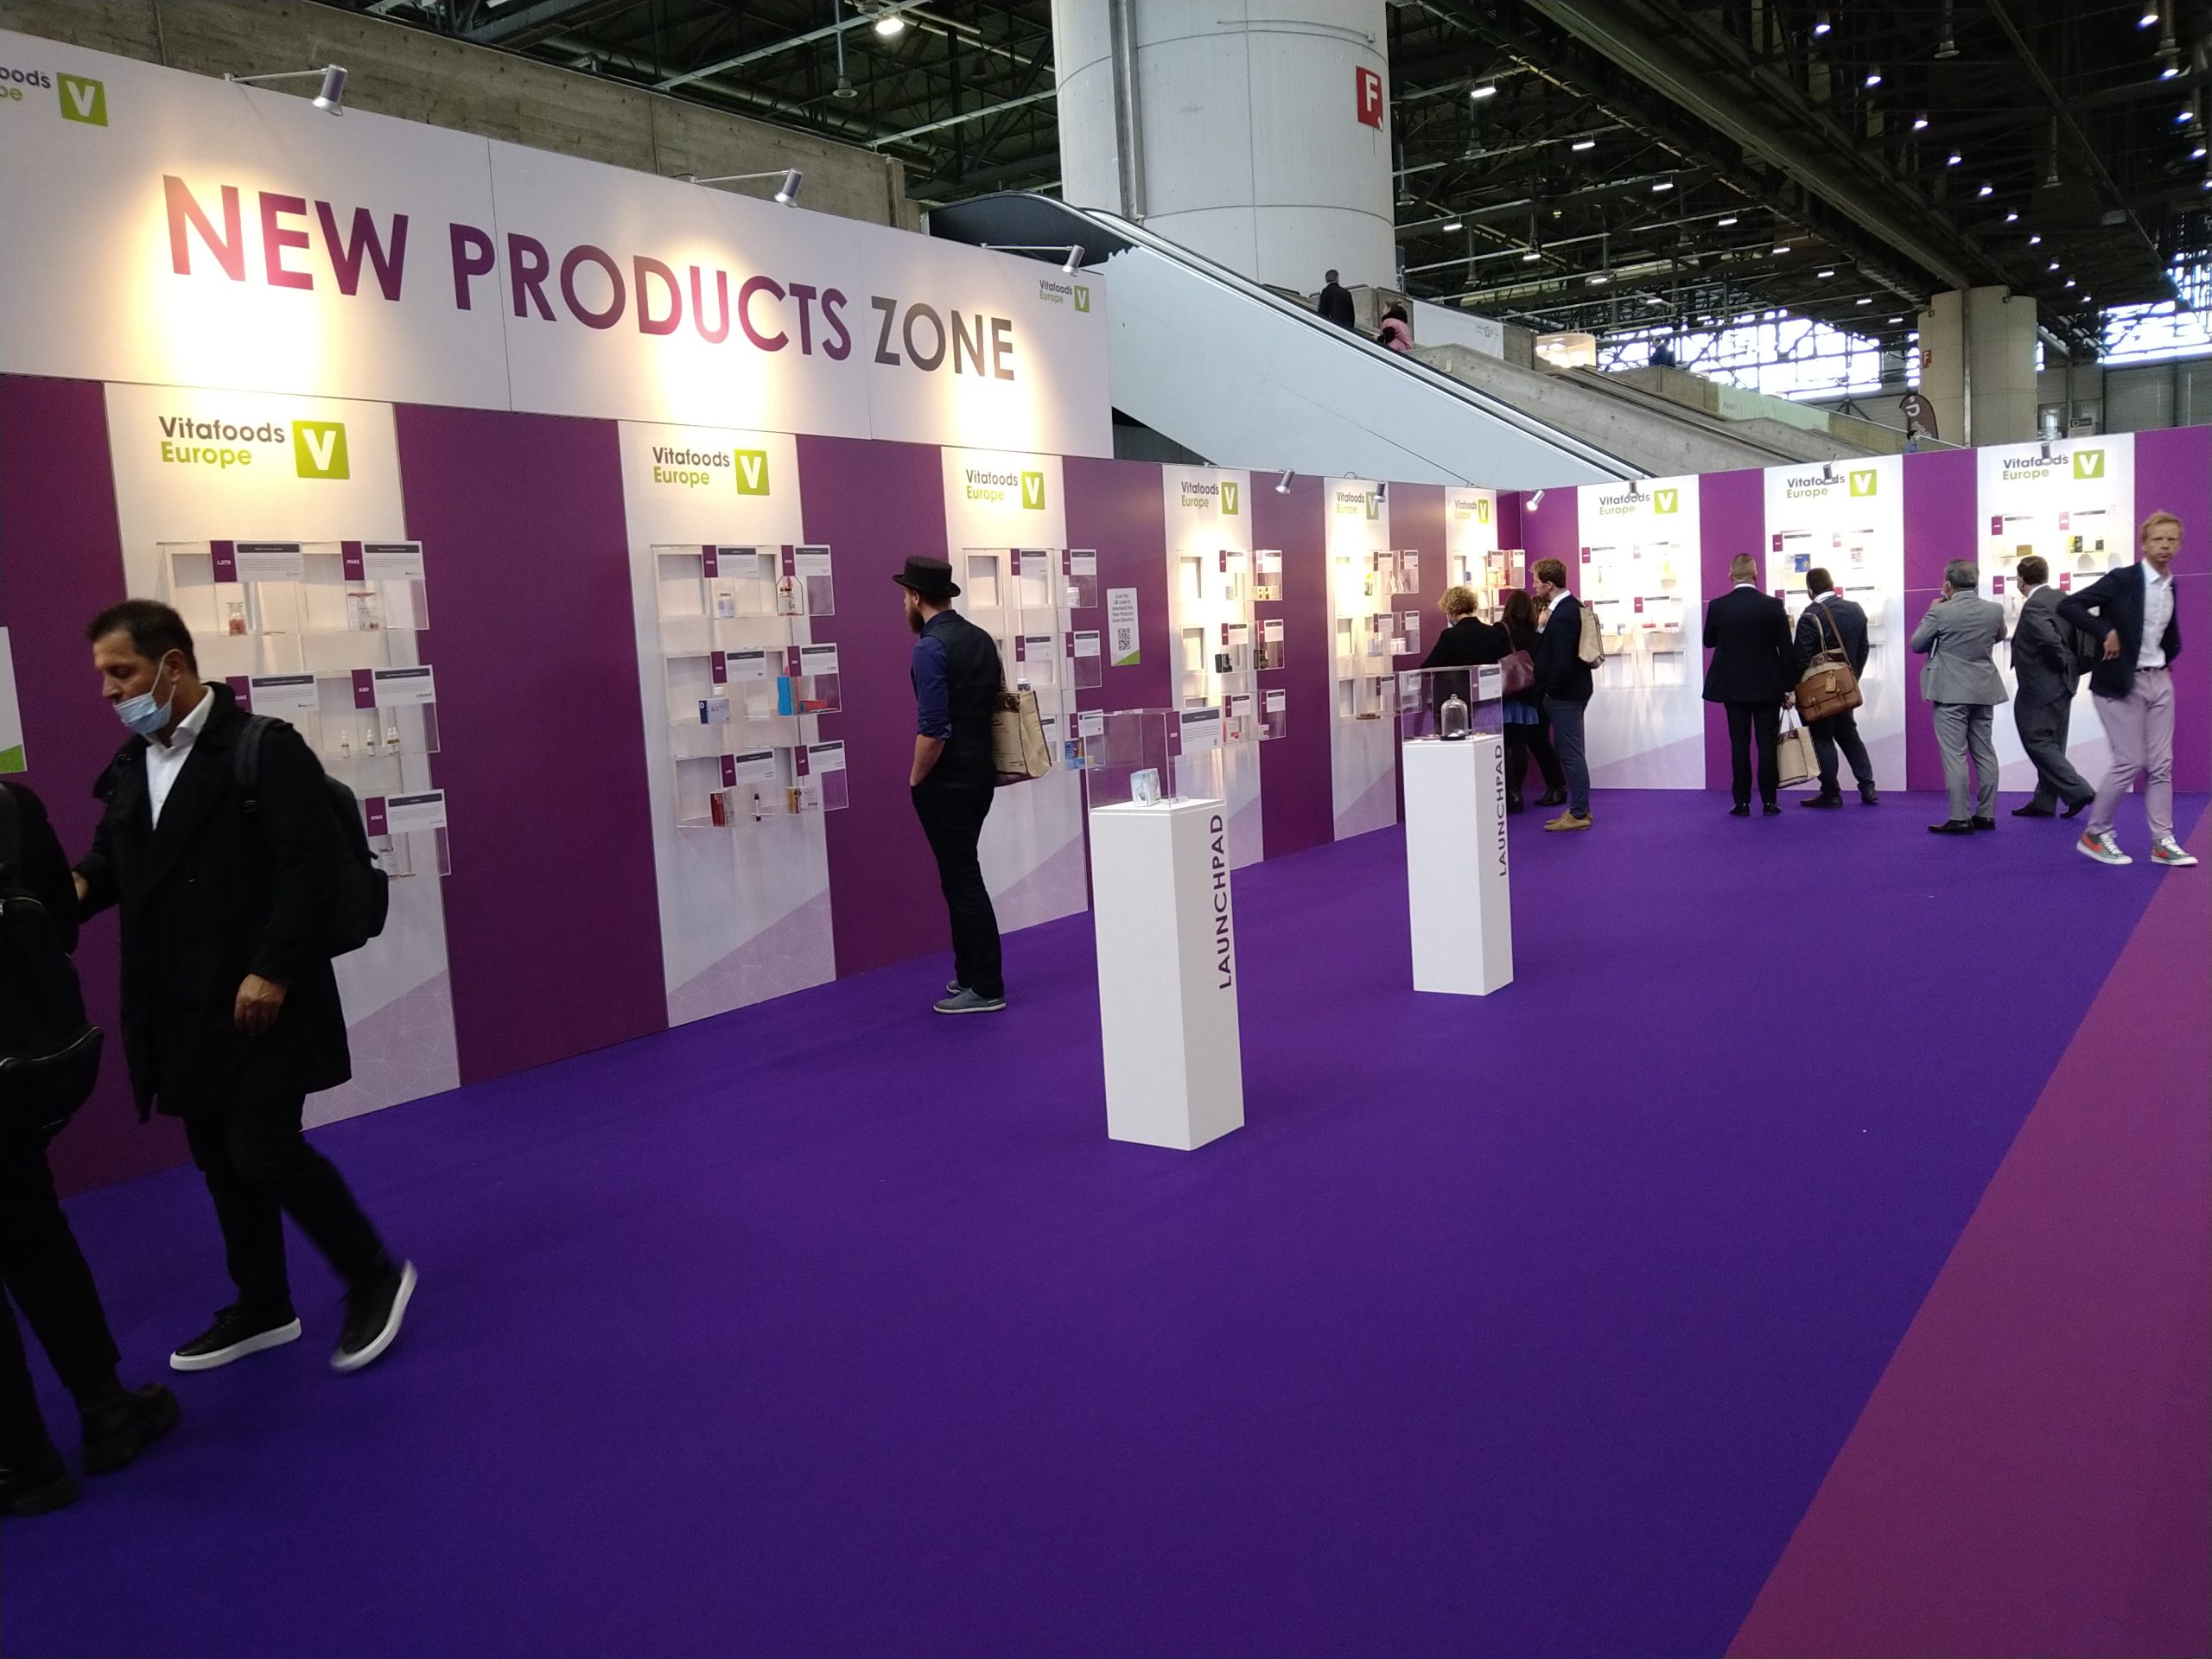 New products zone at Vitafoods 2021